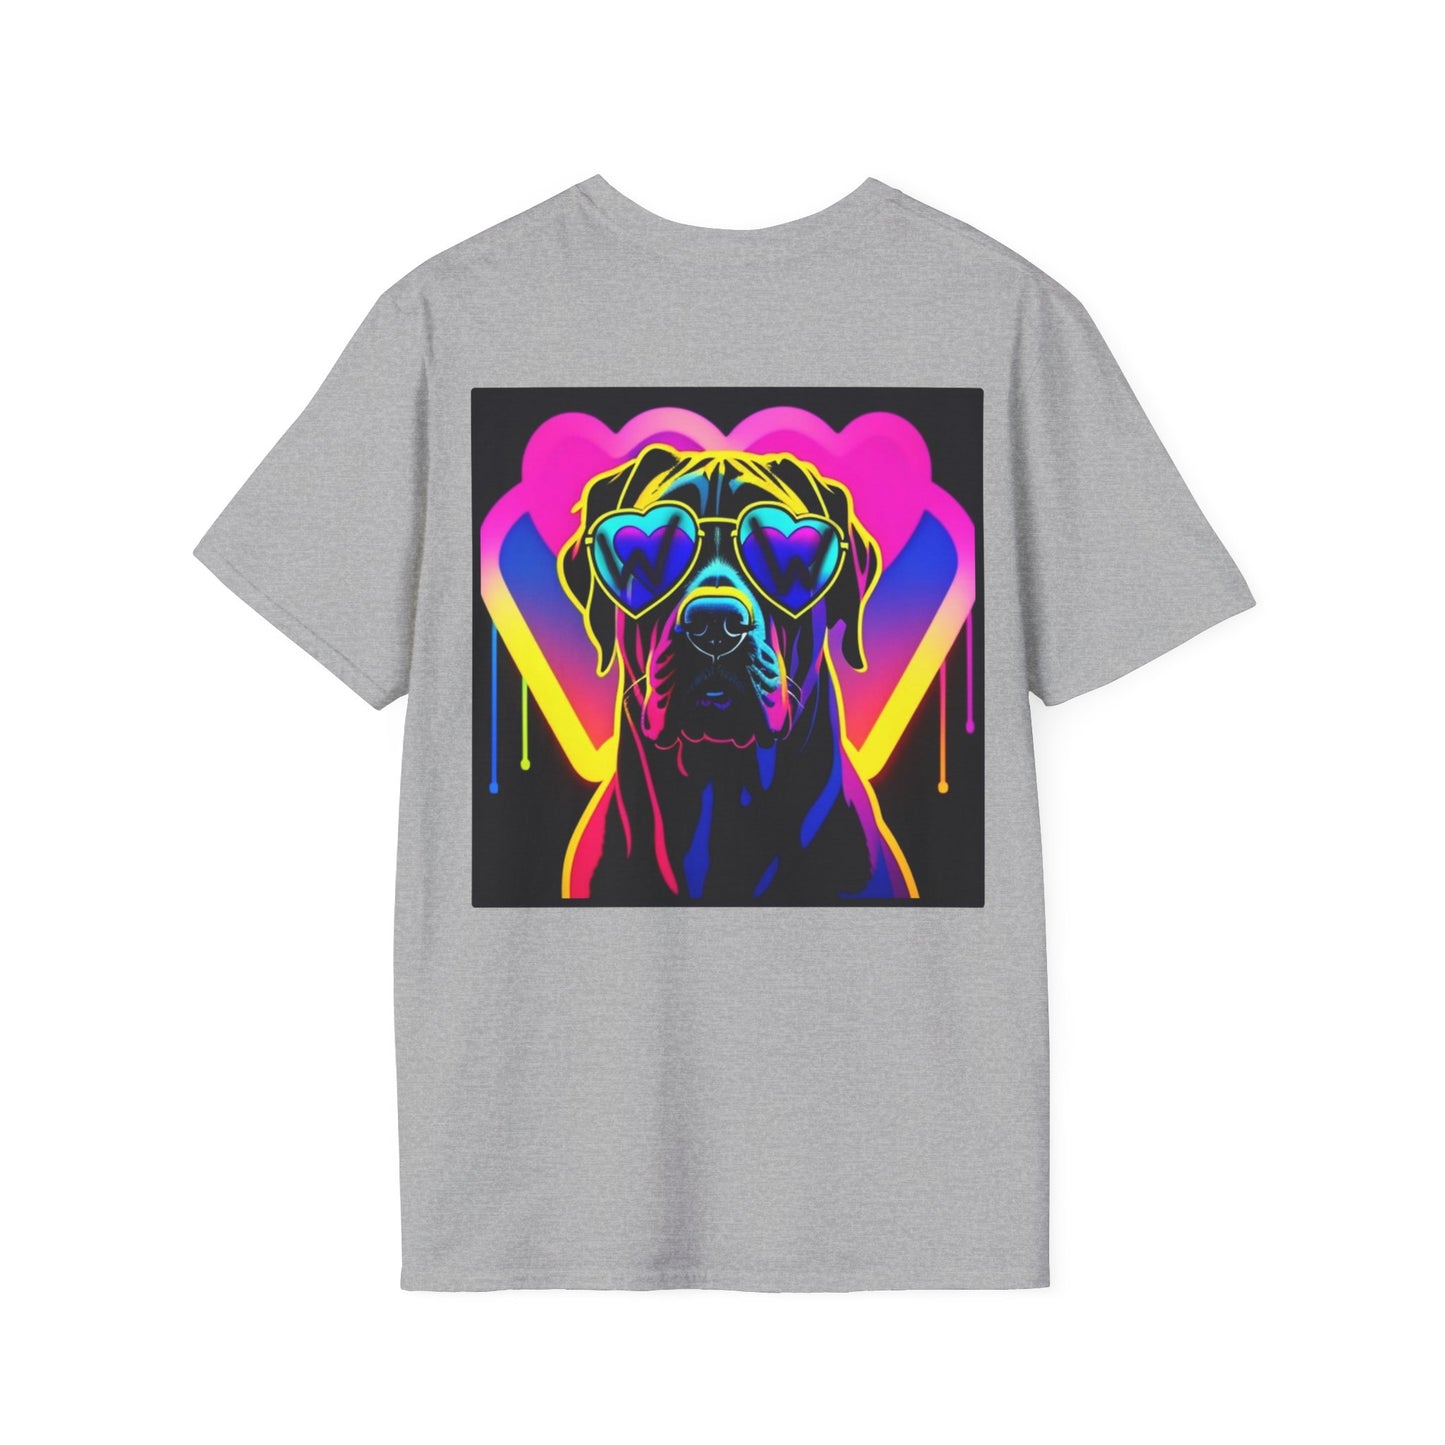 Brody's Electric love Graphic Tee